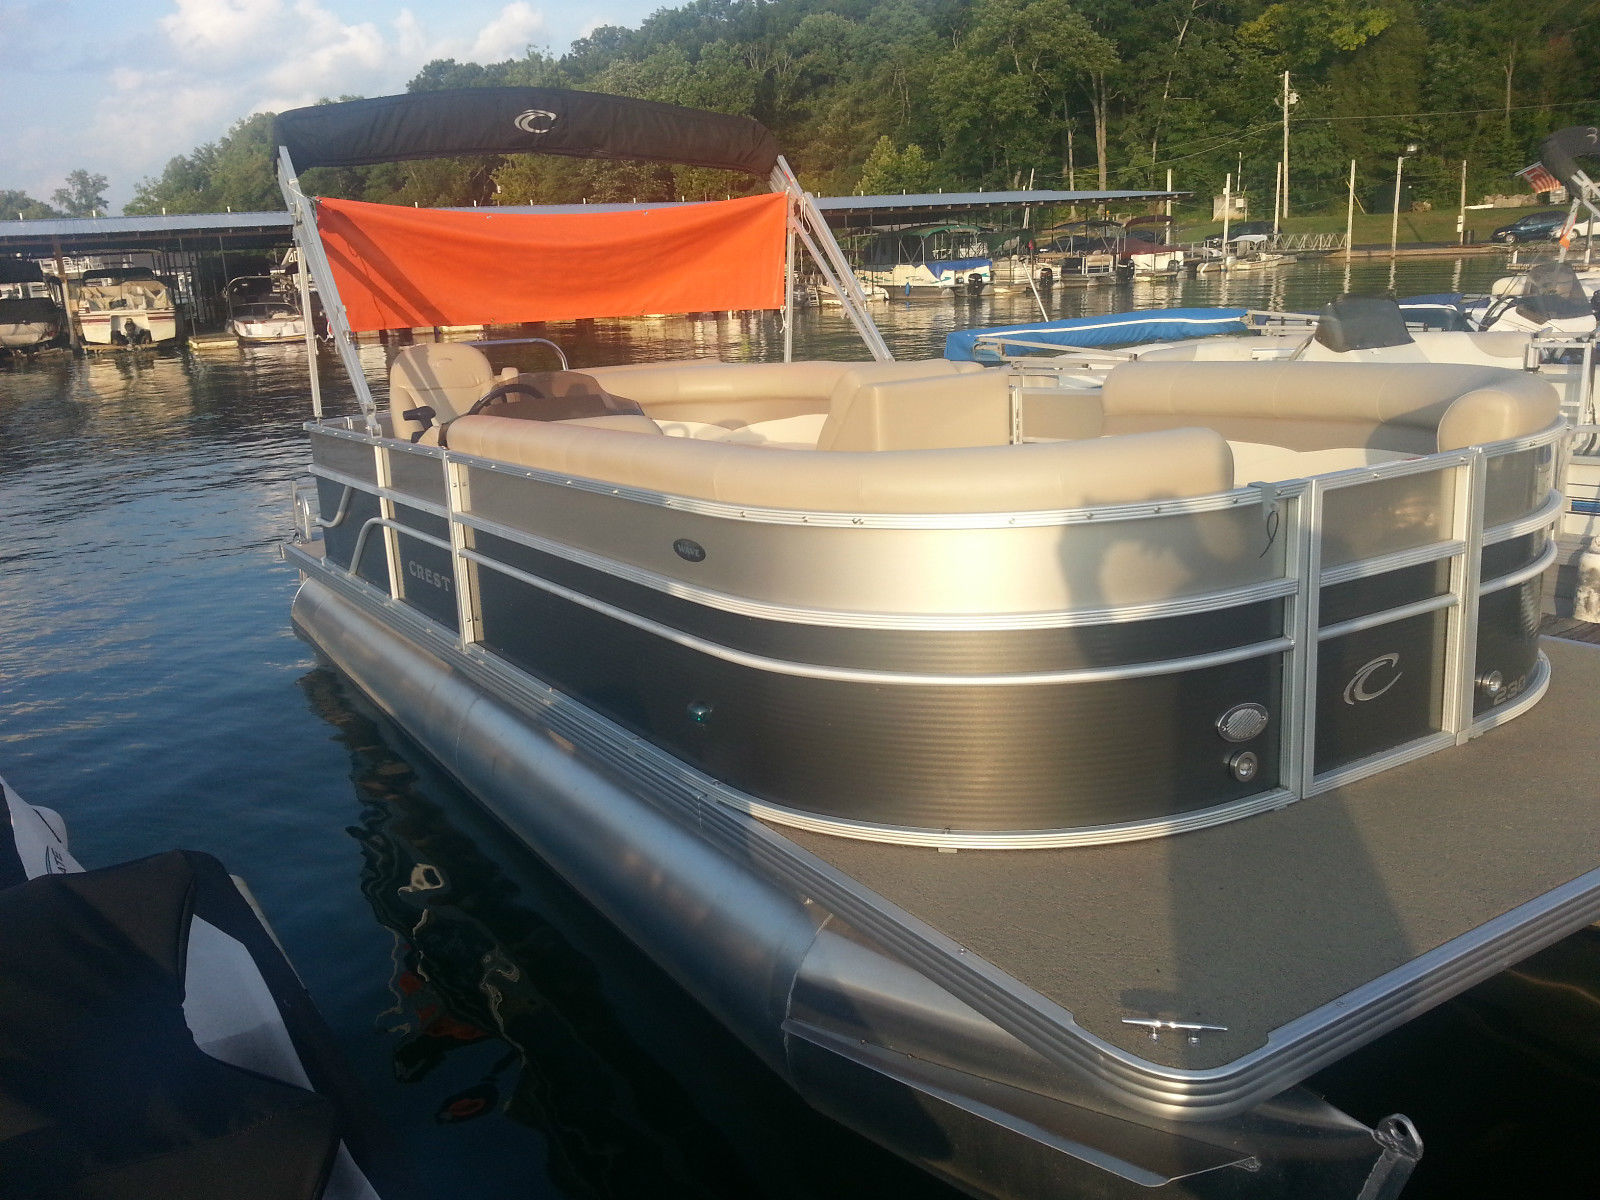 Crest Wave 230 2013 for sale for $23,500 - Boats-from-USA.com